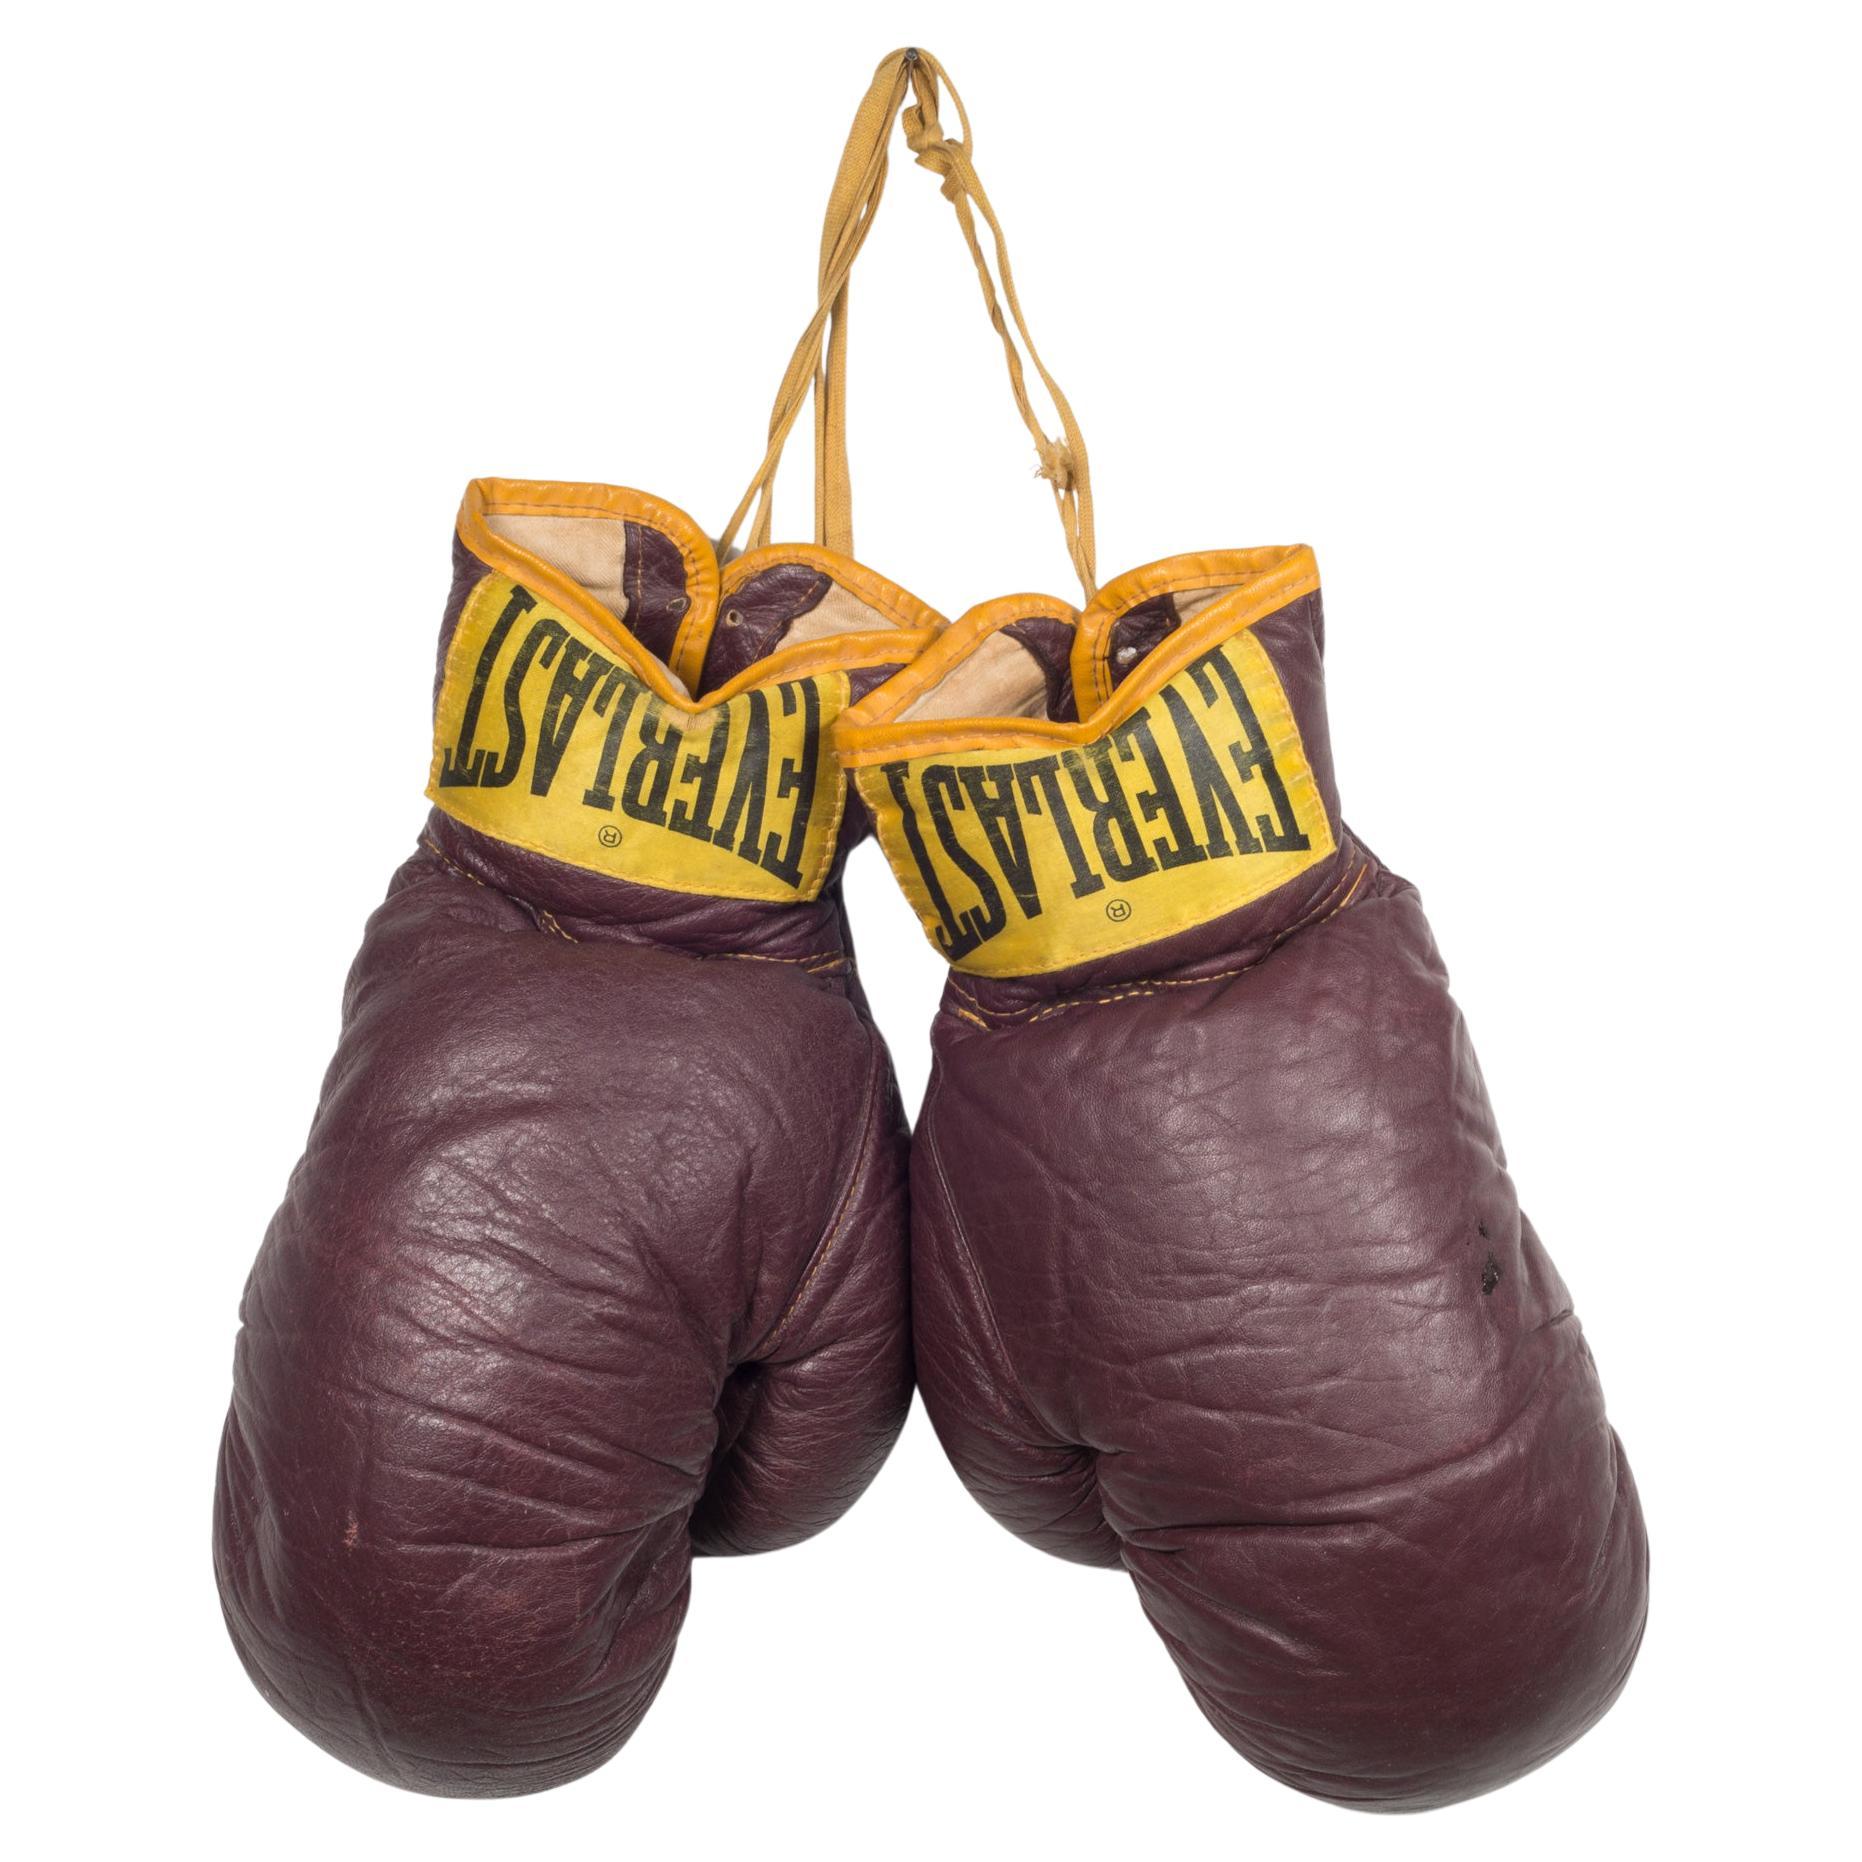 Vintage Leather Everlast Boxing Gloves, circa 1960s at 1stDibs vintage everlast boxing gloves, vintage brown boxing gloves, everlast old school bag gloves